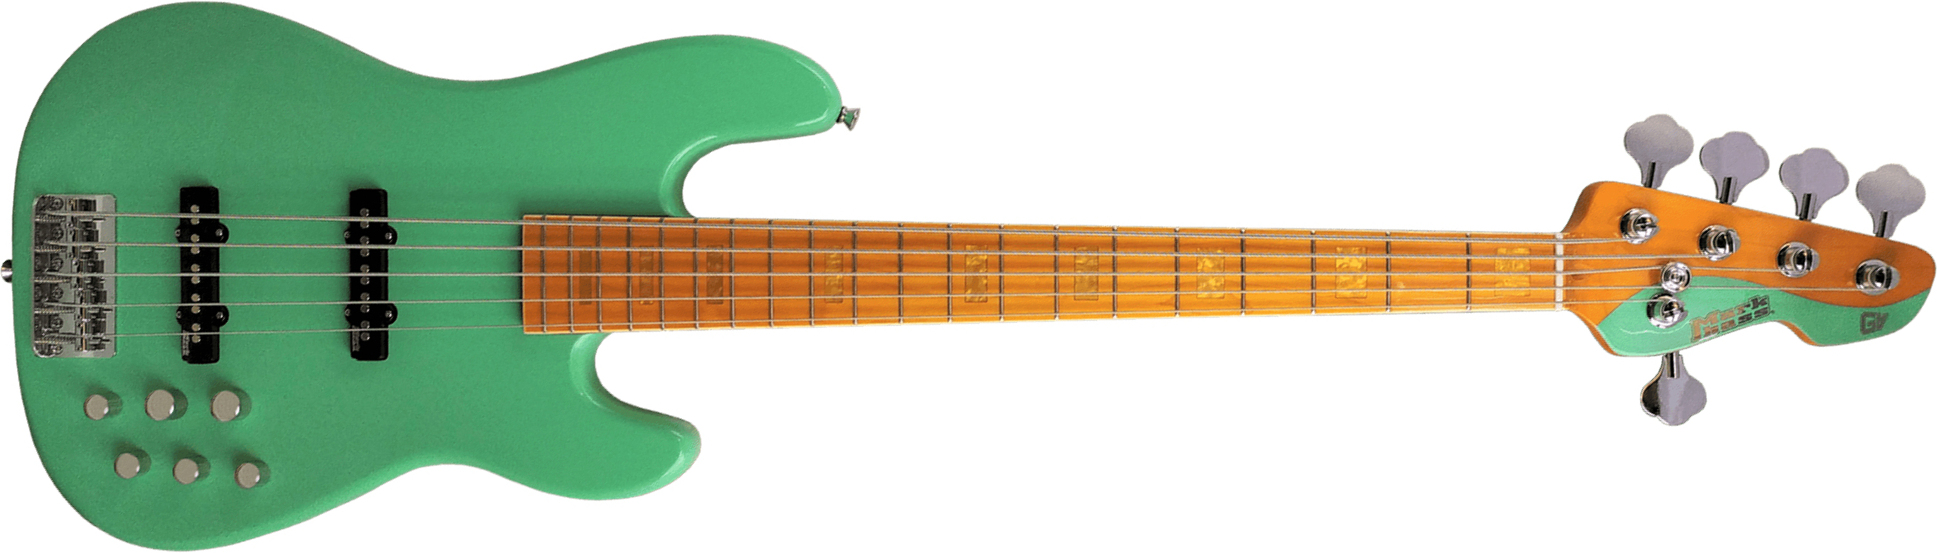 Markbass Mb Gv 5 Gloxy Val Cr Mp 5c Active Mn - Surf Green - Solid body elektrische bas - Main picture